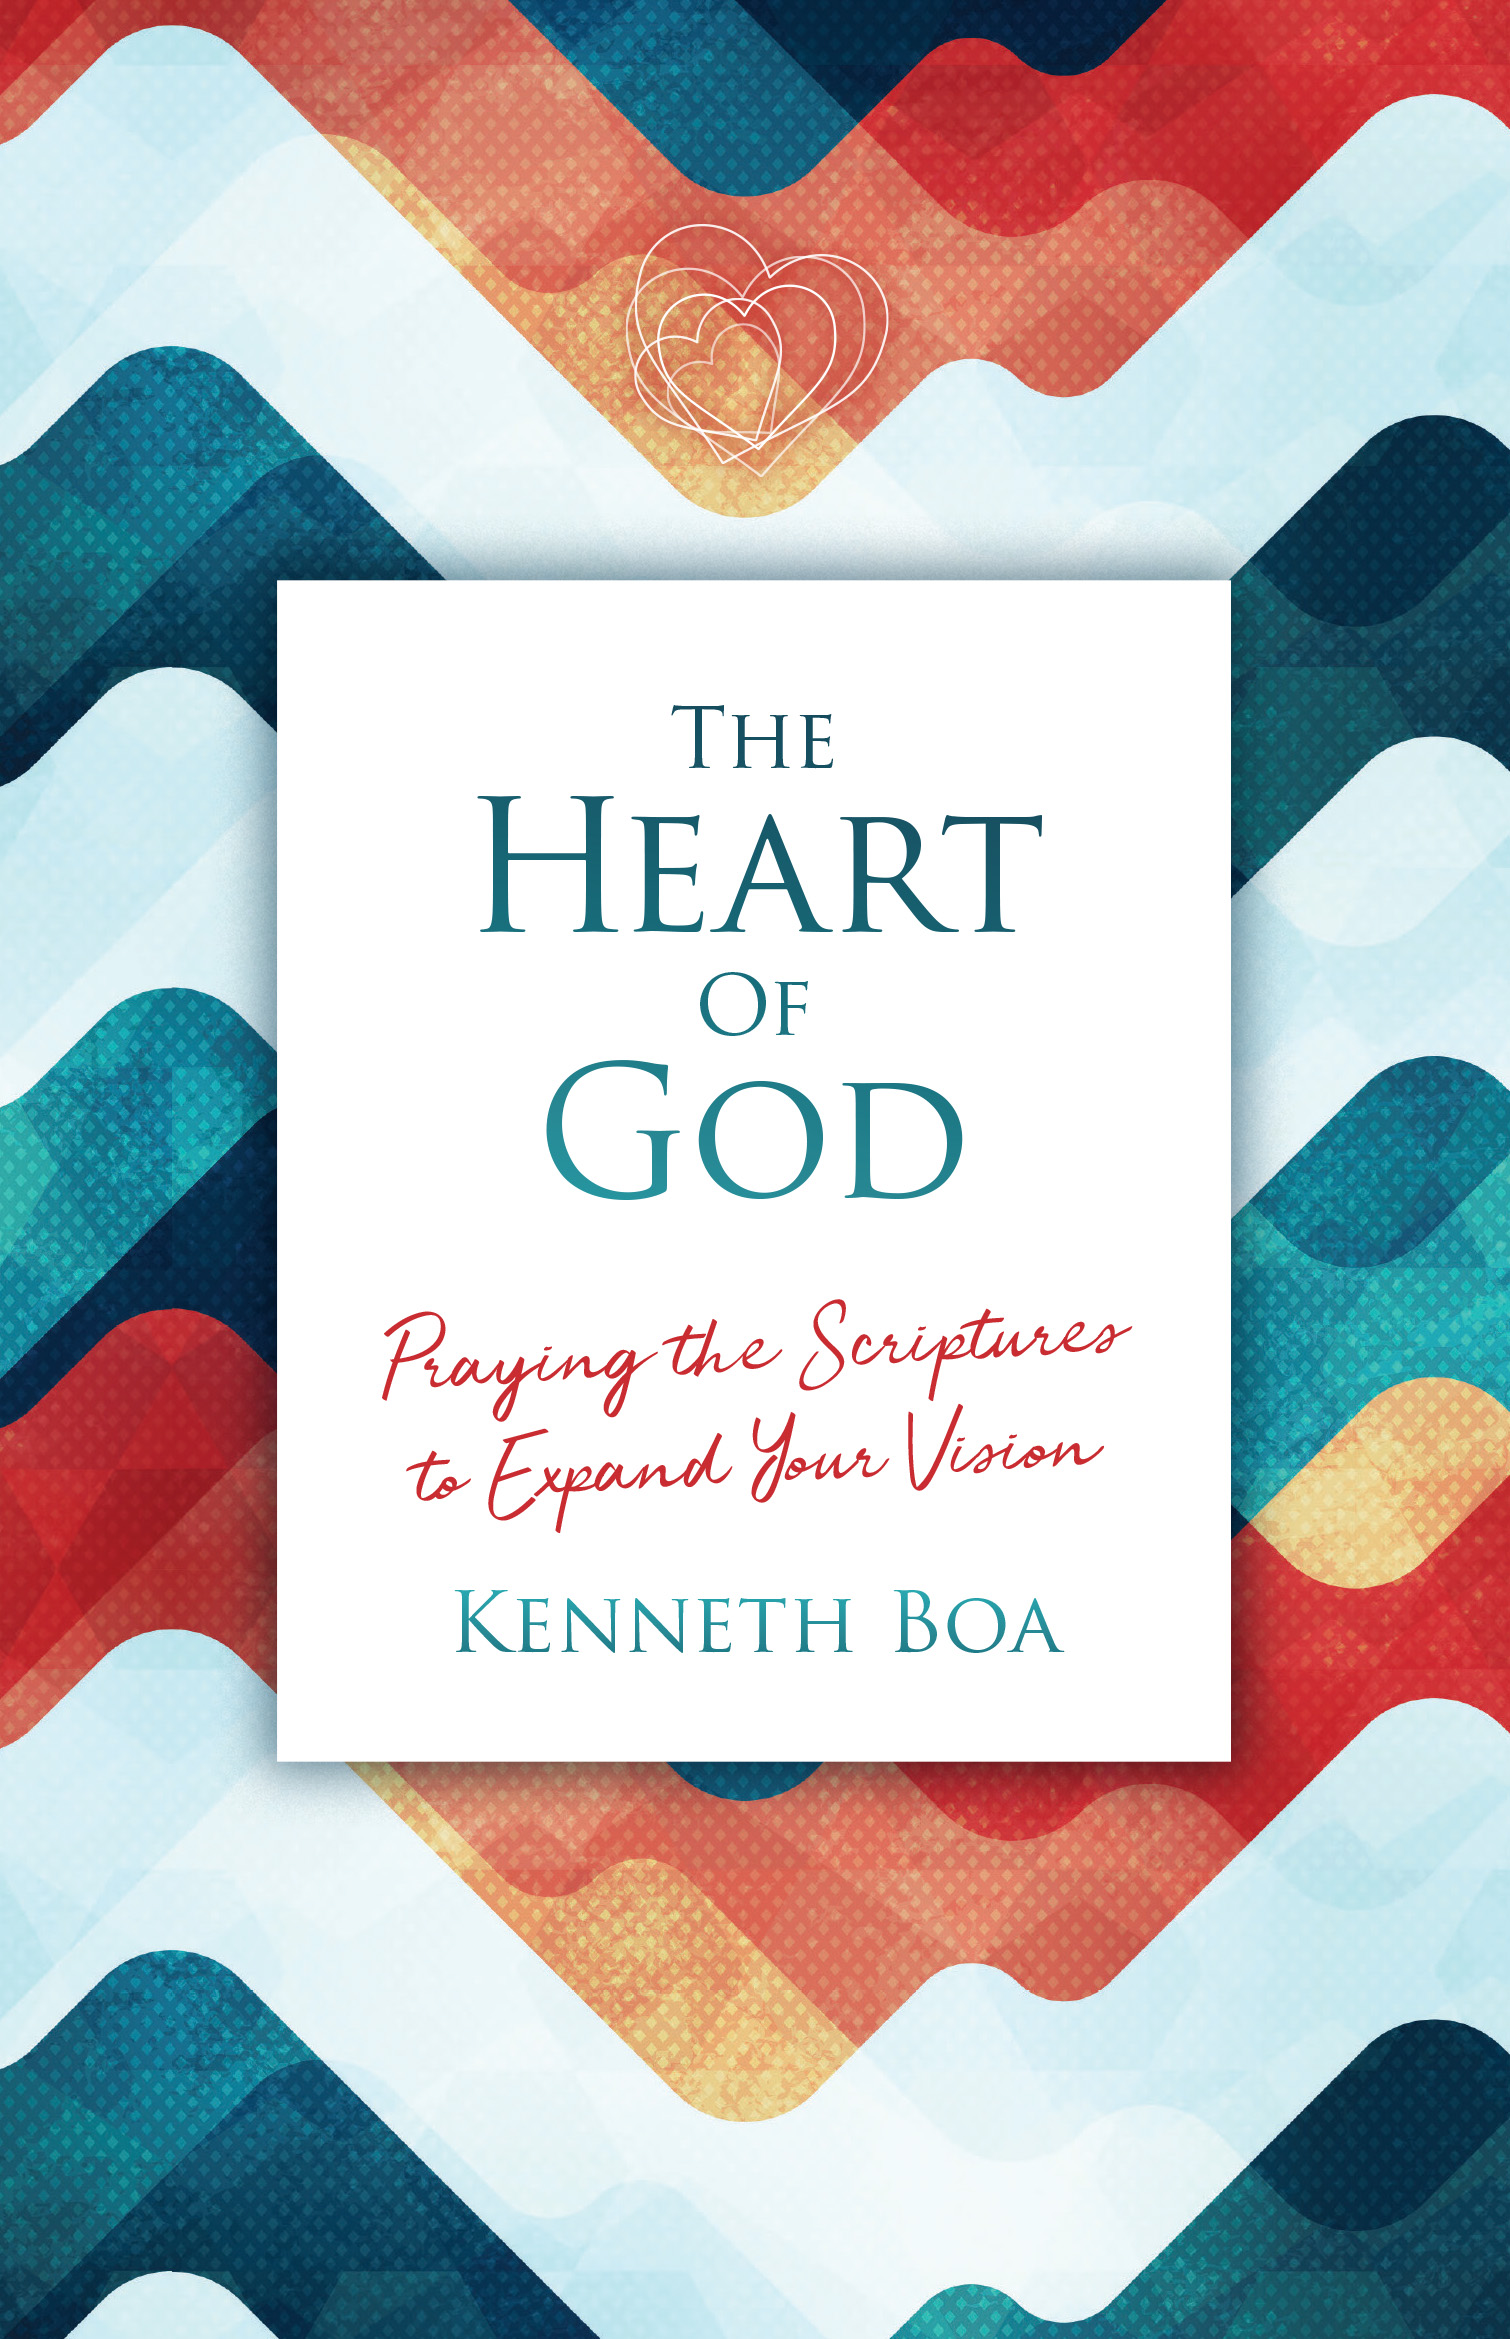 The Heart of God - Praying the Scriptures to Expand Your Vision